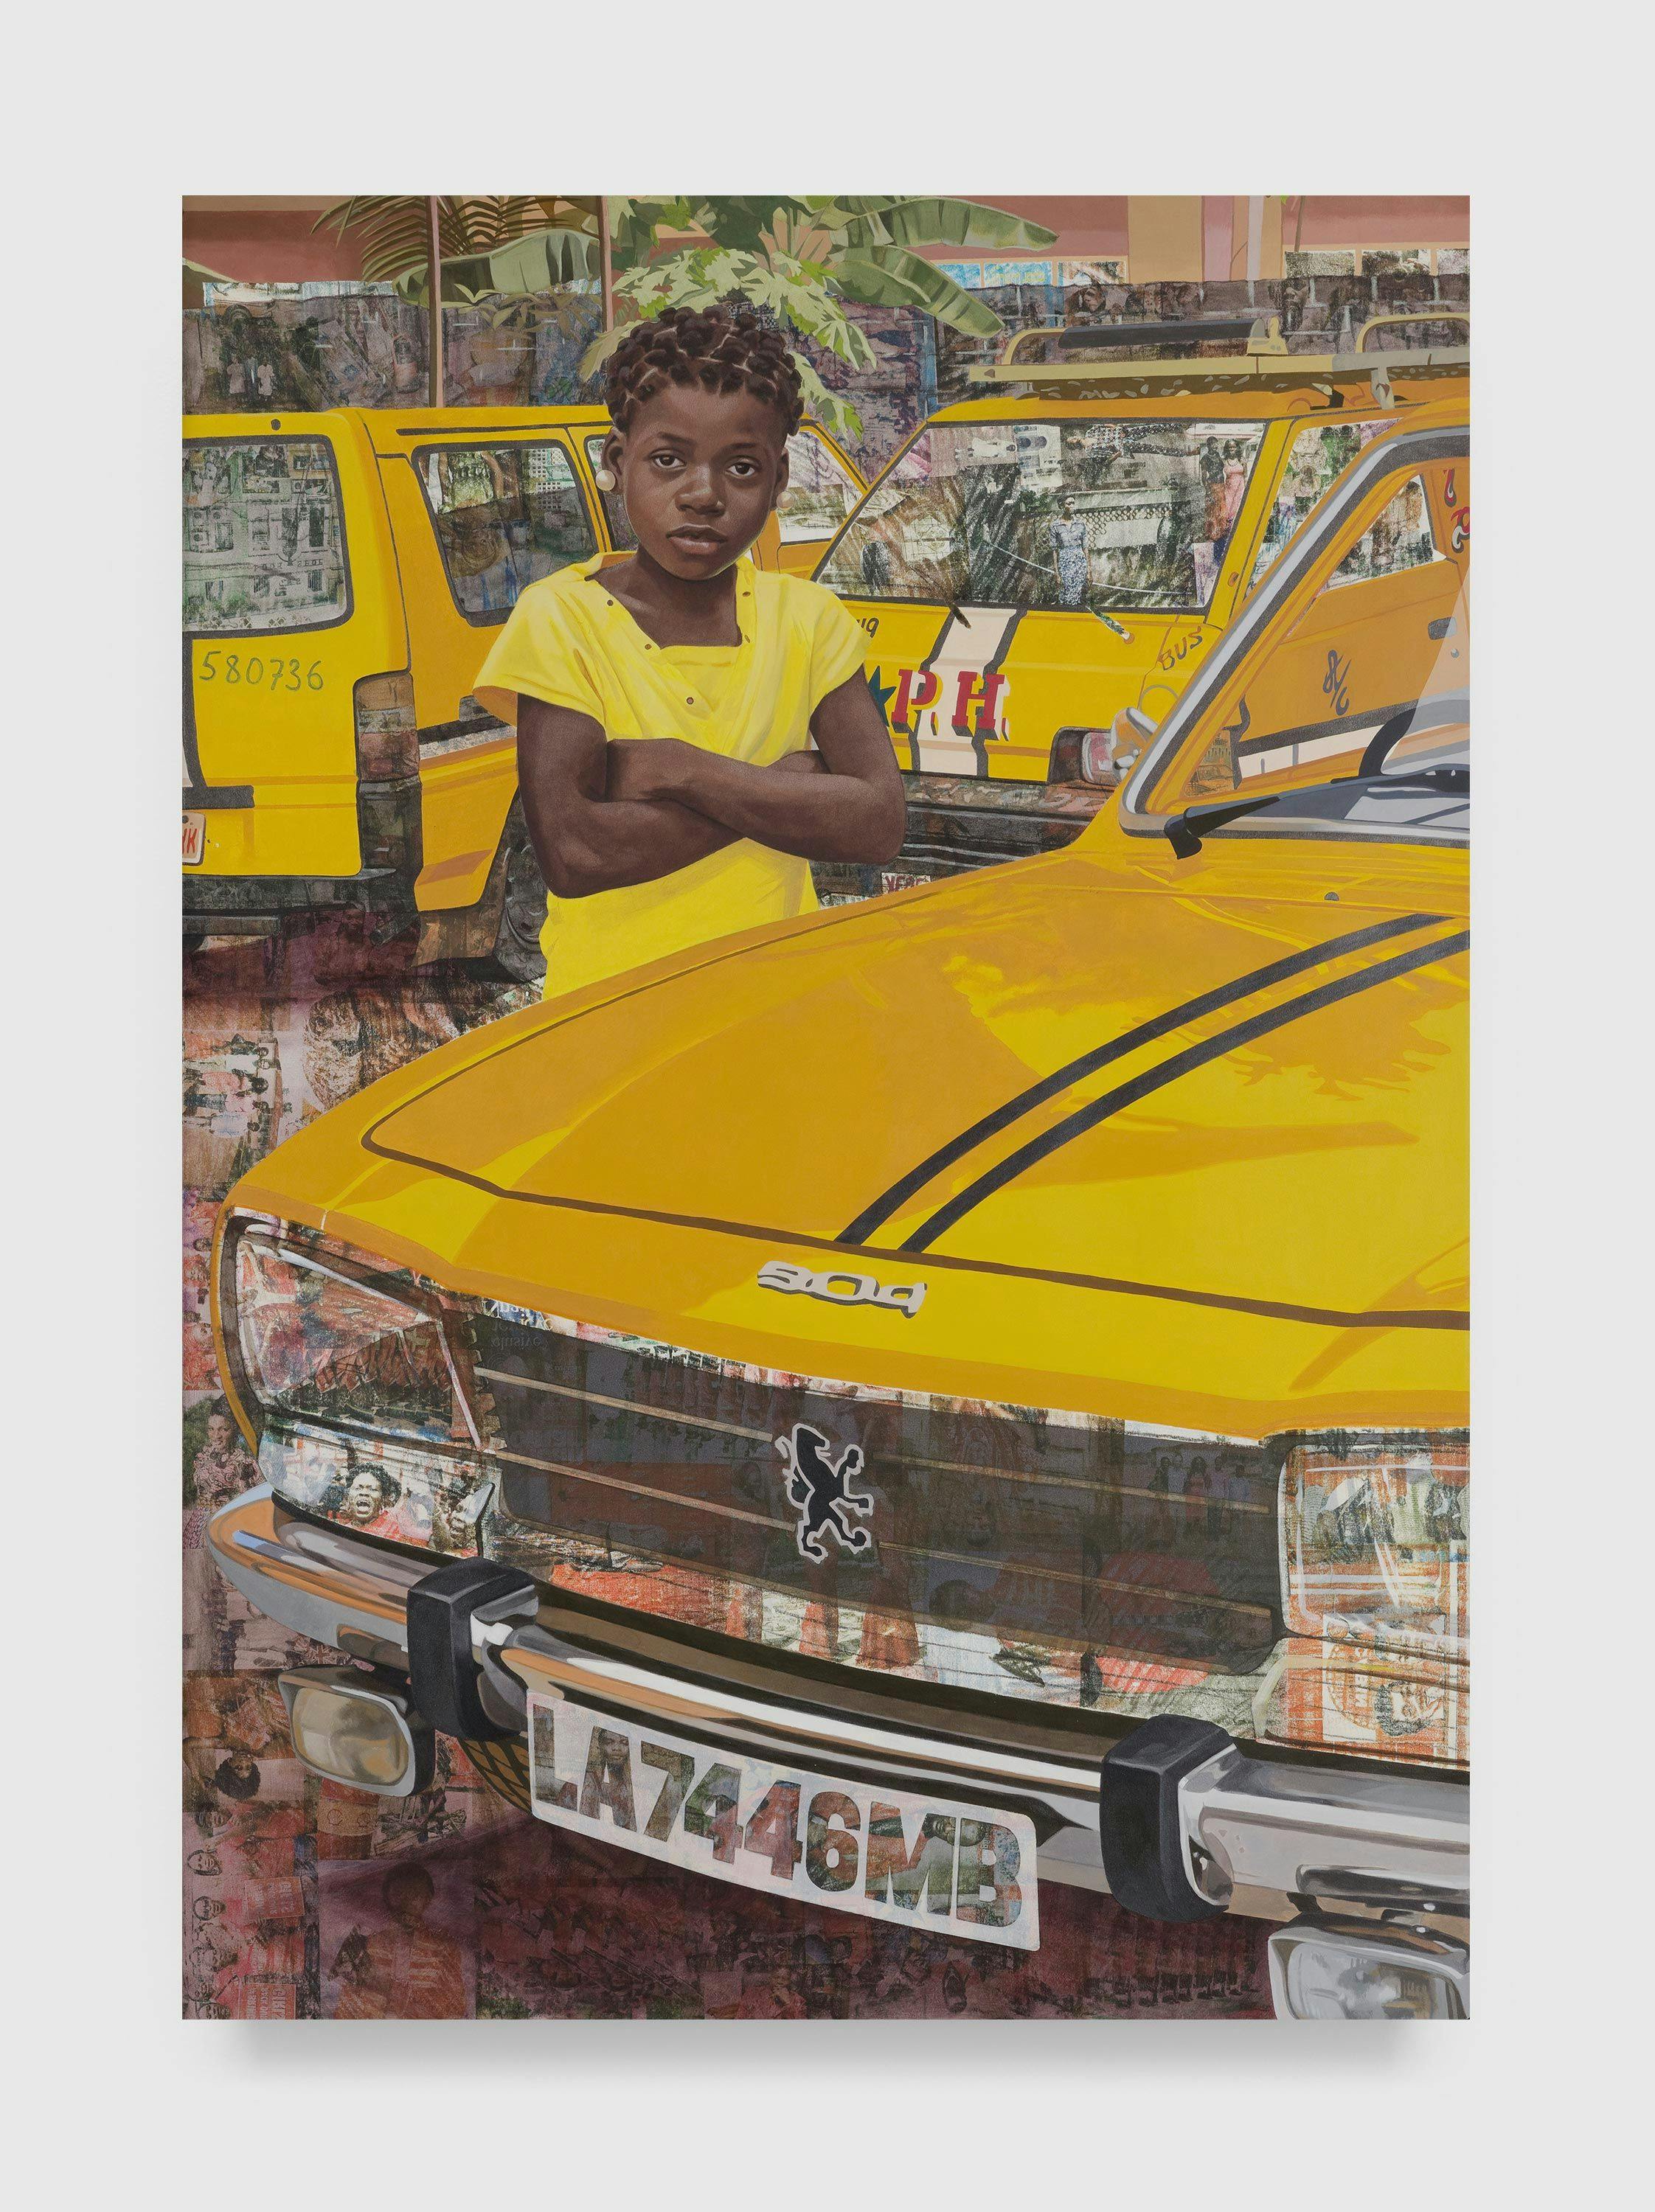 A work on paper by Njideka Akunyili Crosby, titled "The Beautyful Ones" Series #7, dated 2018.